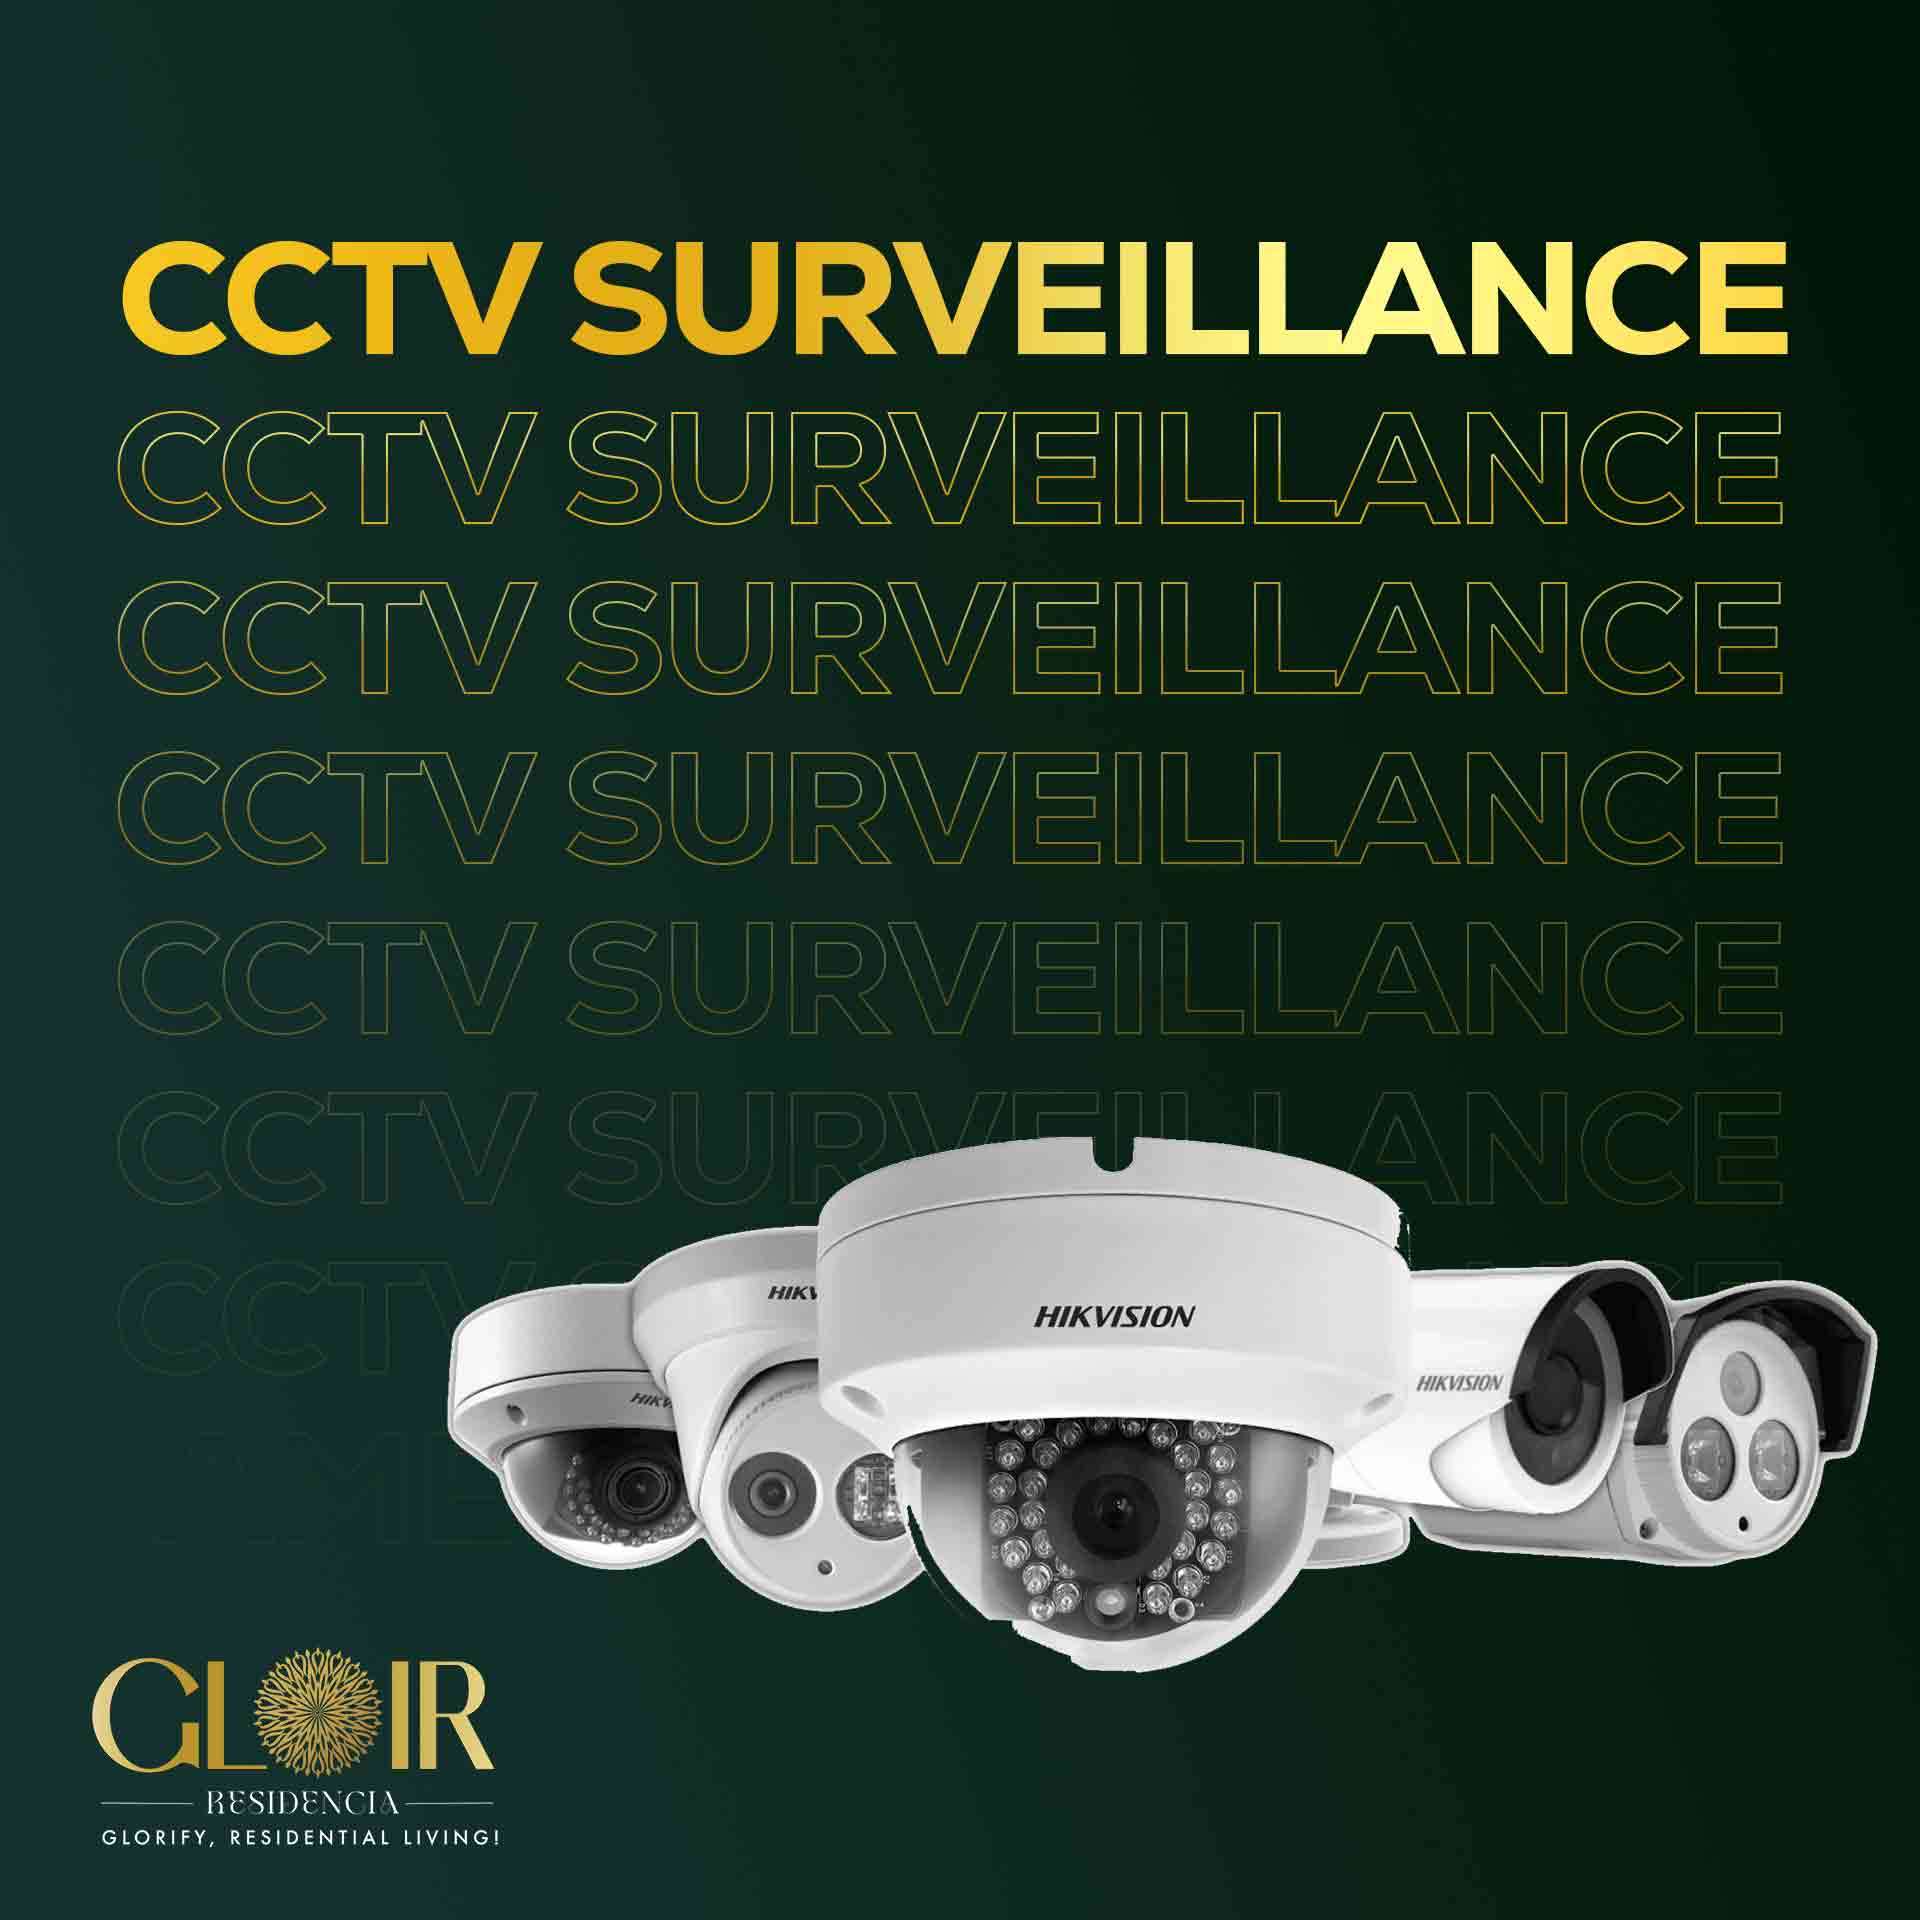 Features-(CCTV)